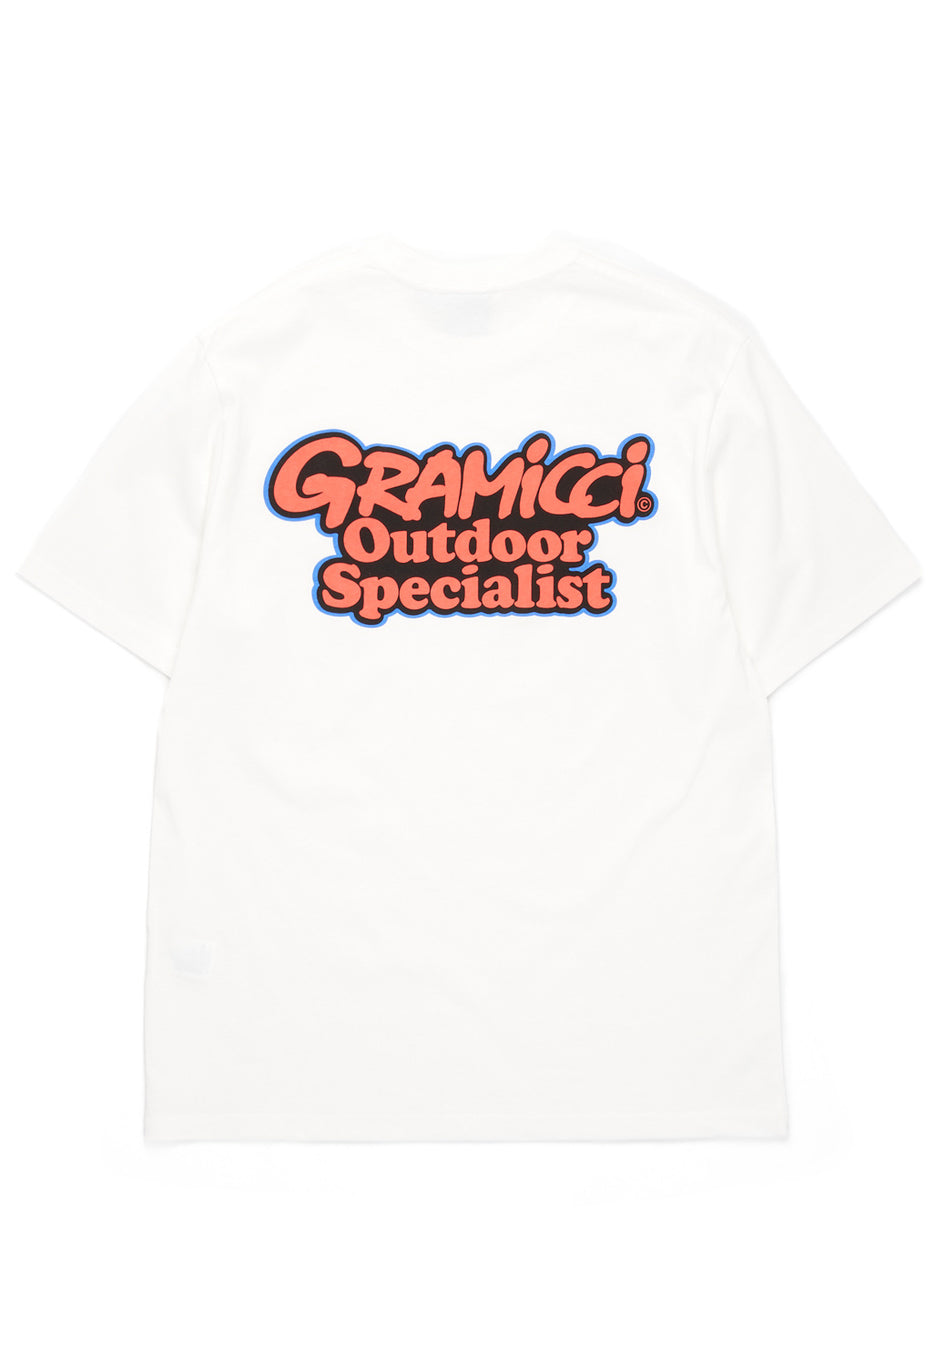 Gramicci Outdoor Specialist Tee - White